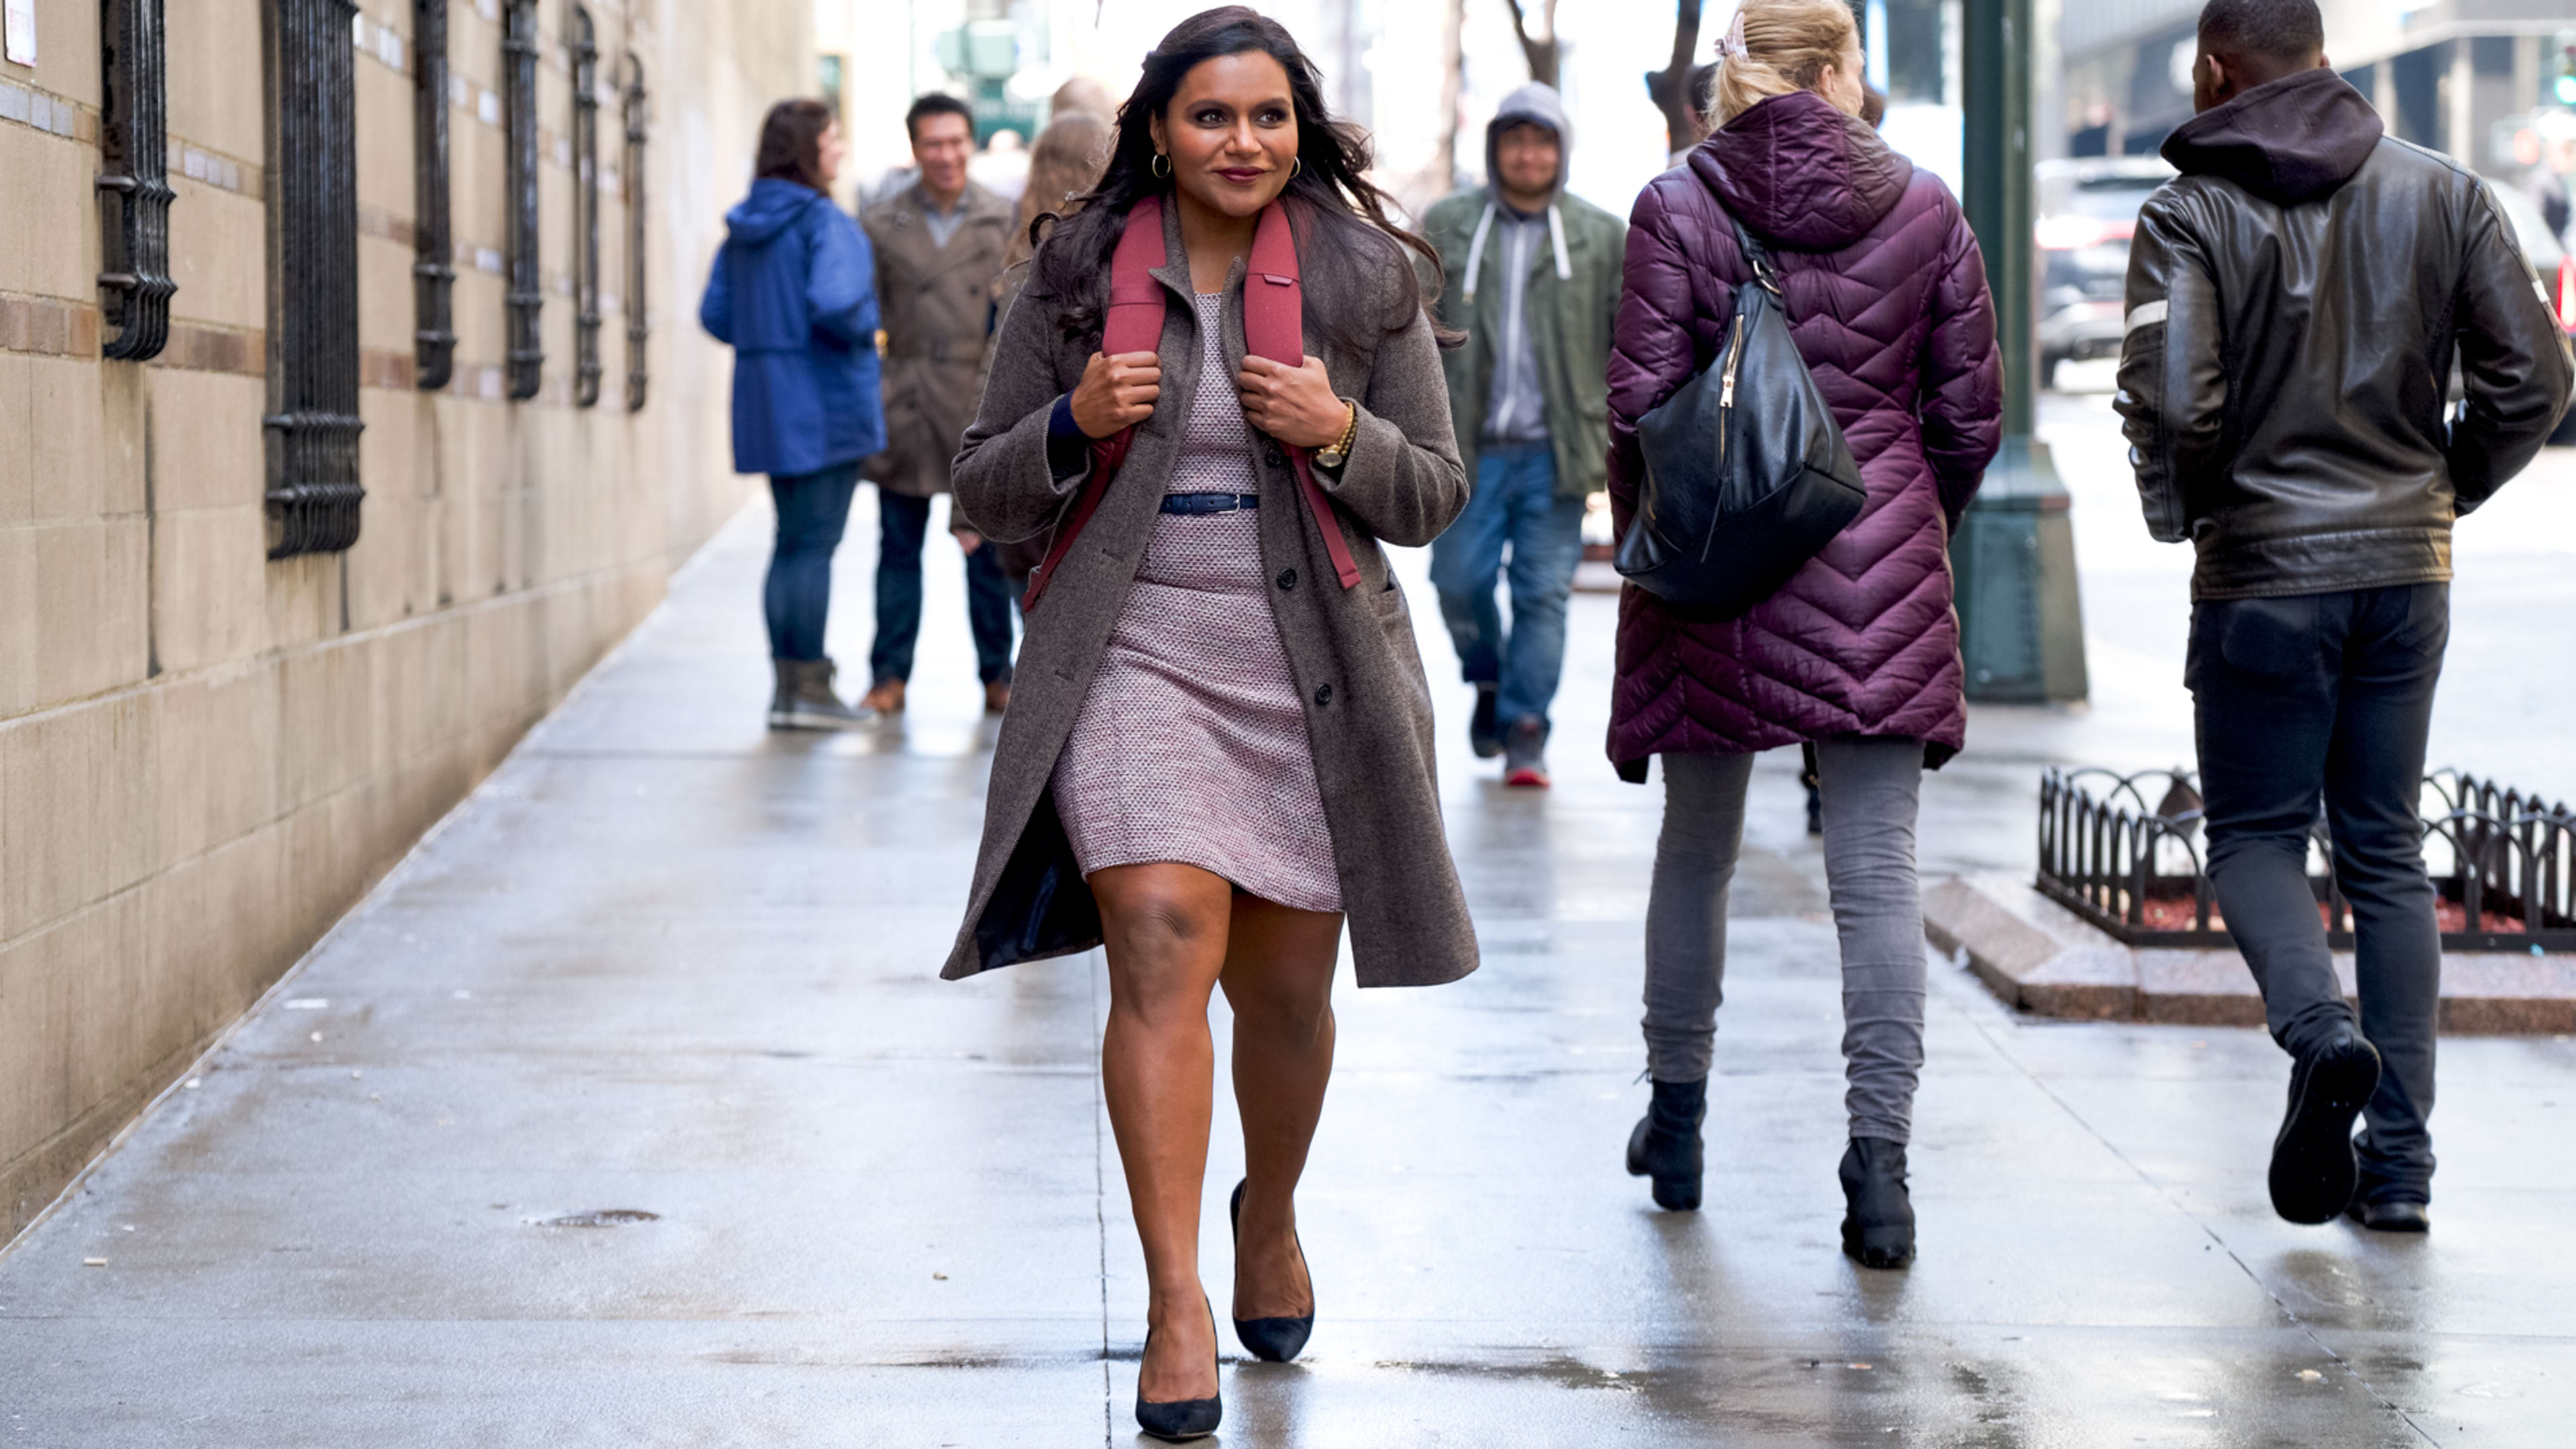 10 IRL solutions to the toxic workplace in Mindy Kaling’s ‘Late Night’